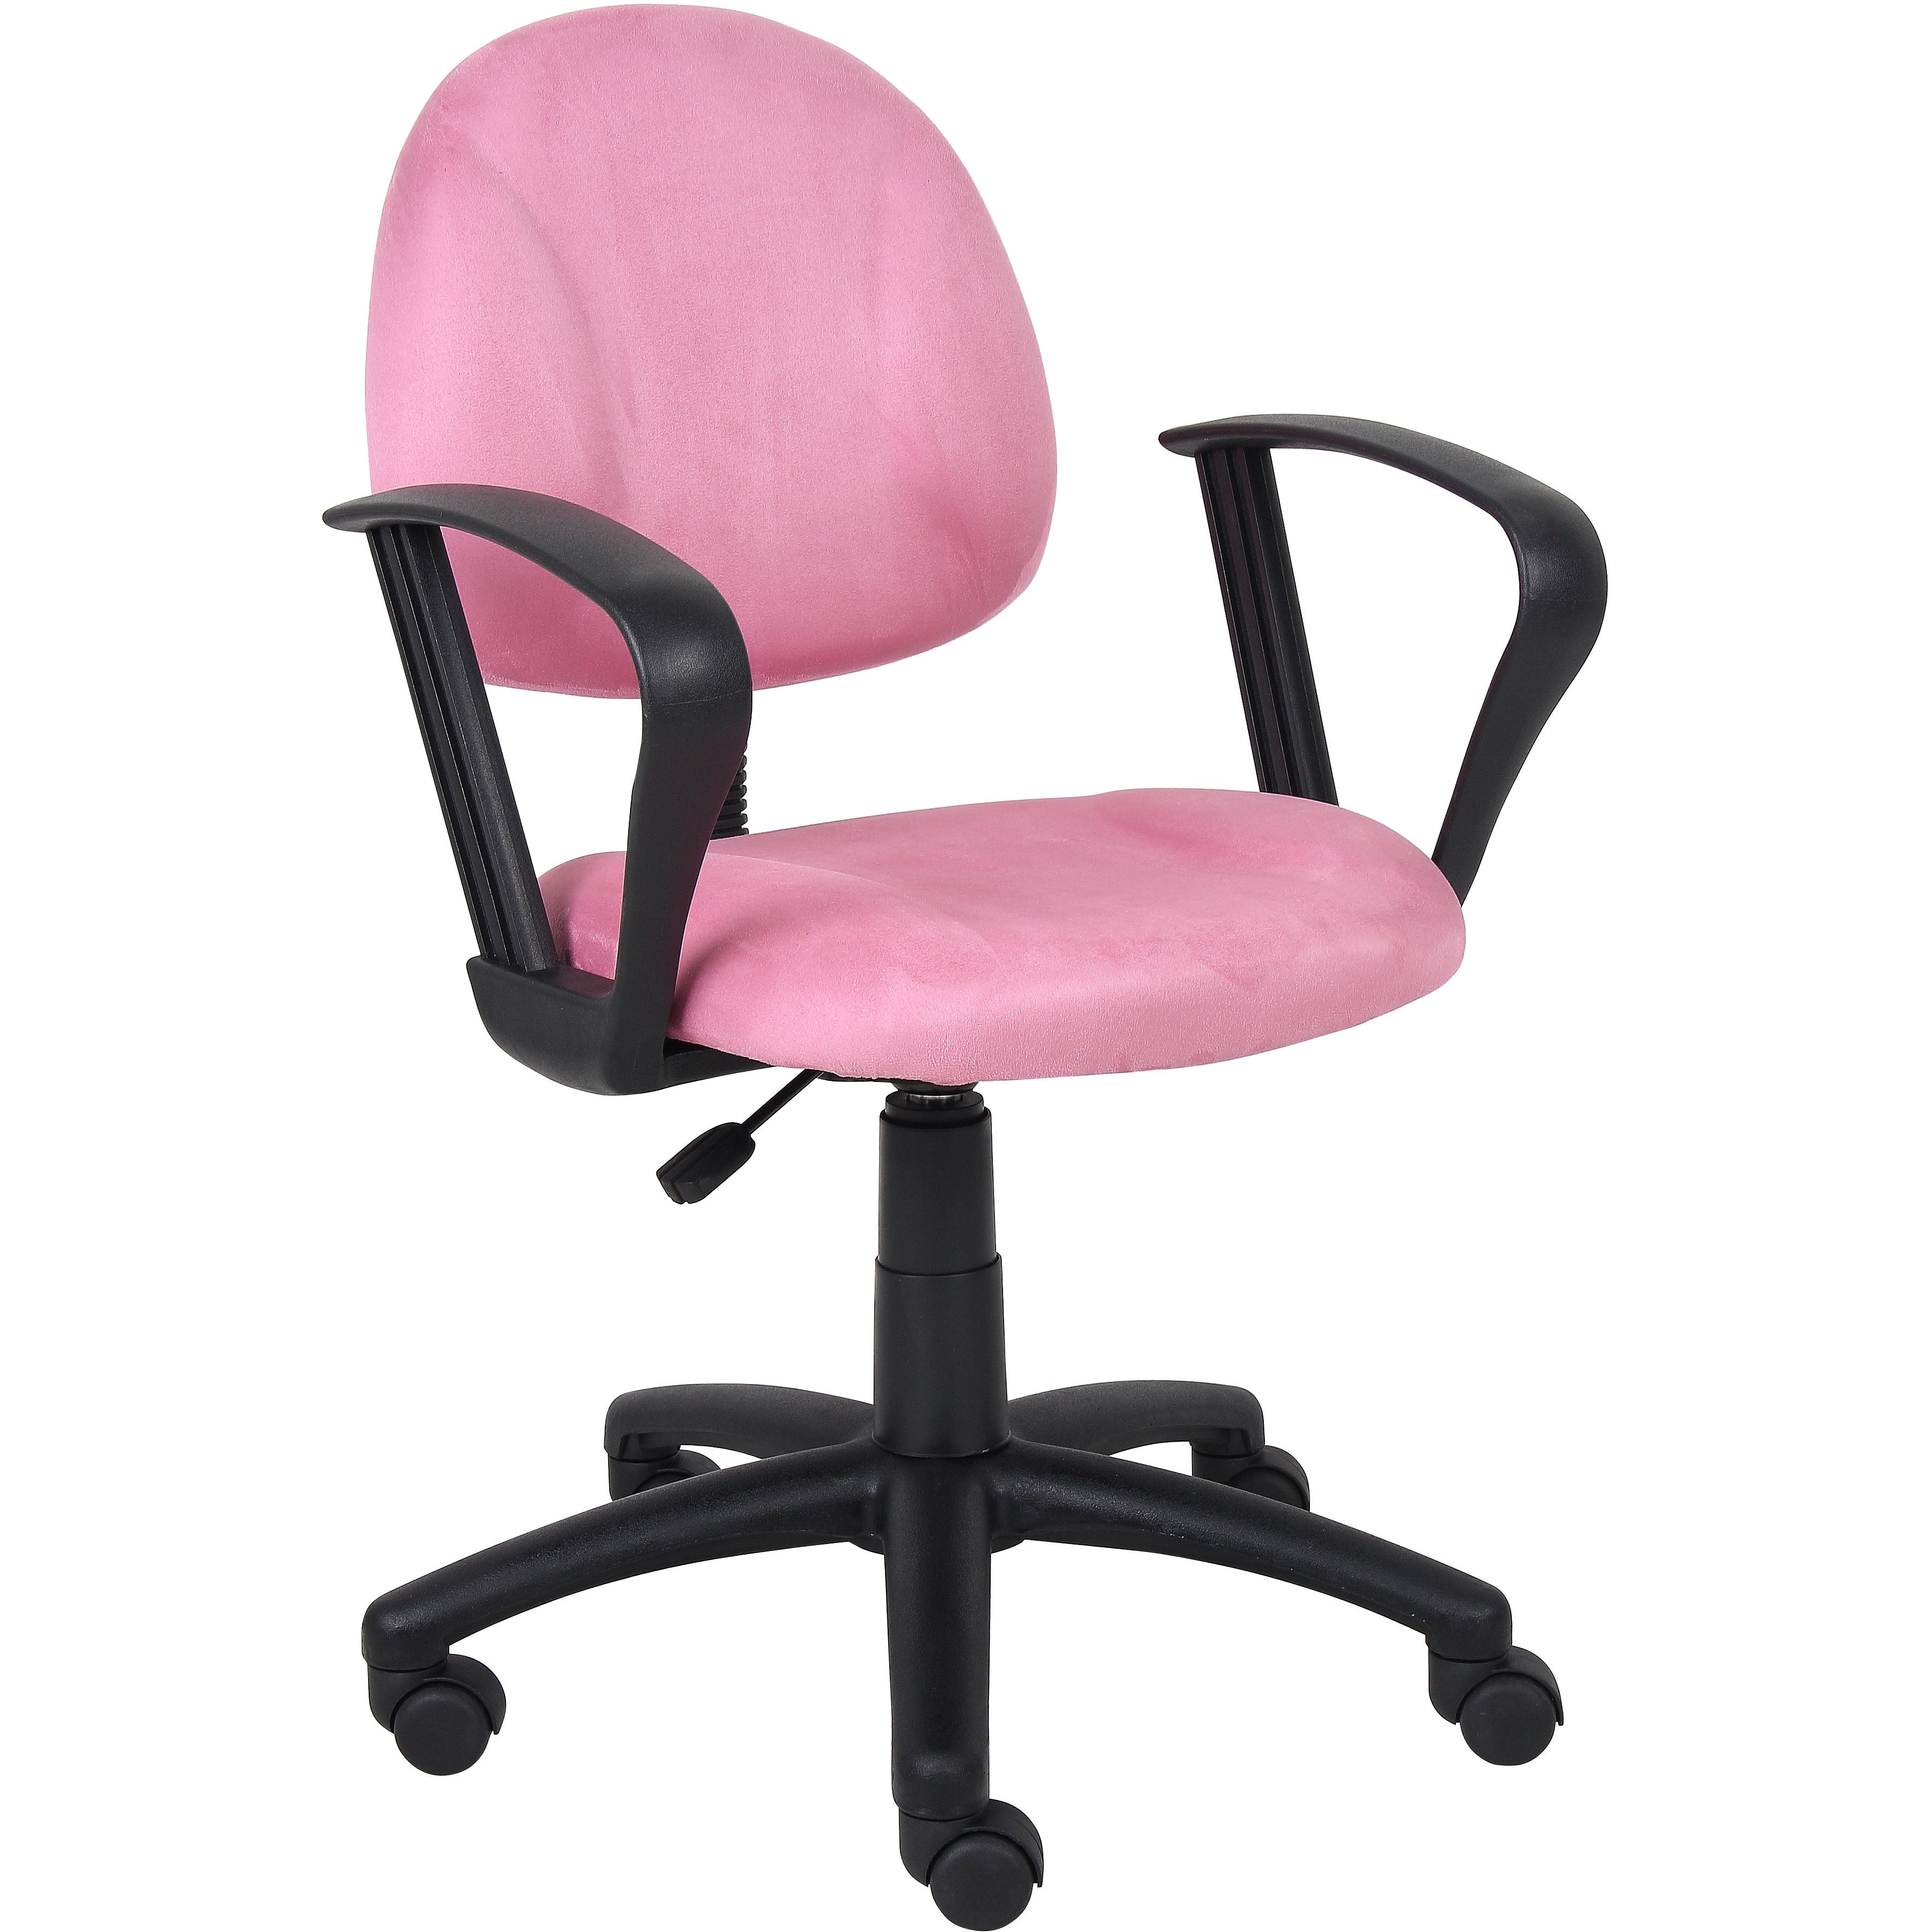 Pink Microfiber Deluxe Posture Chair with Loop Arms., B327-PK